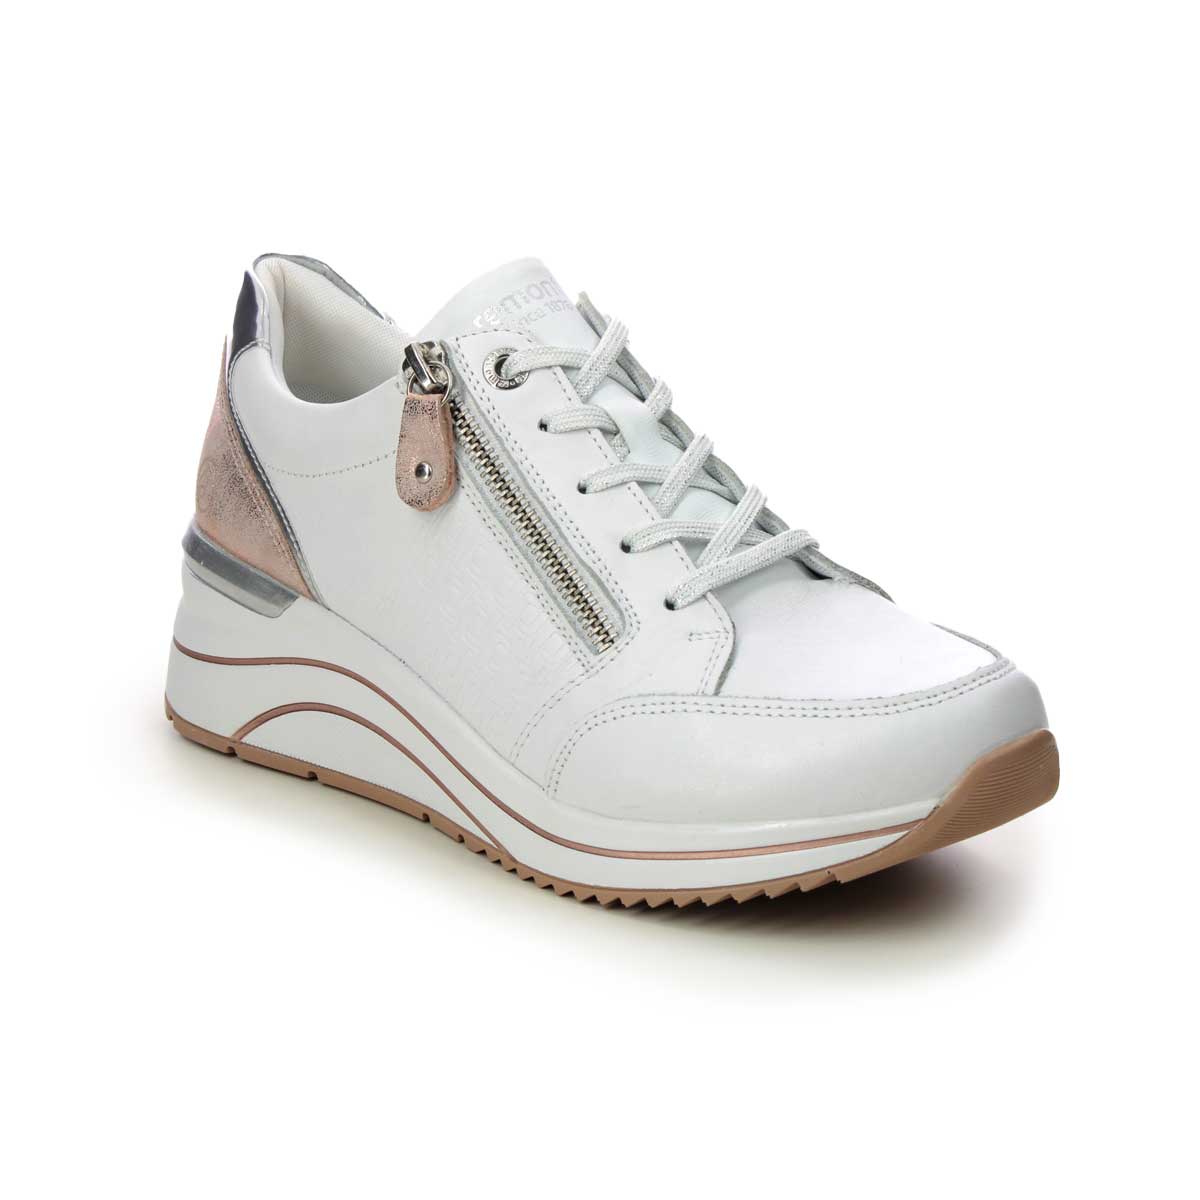 Remonte D0T03-80 Ranzip Wedge White Pink Womens trainers in a Plain Leather in Size 40